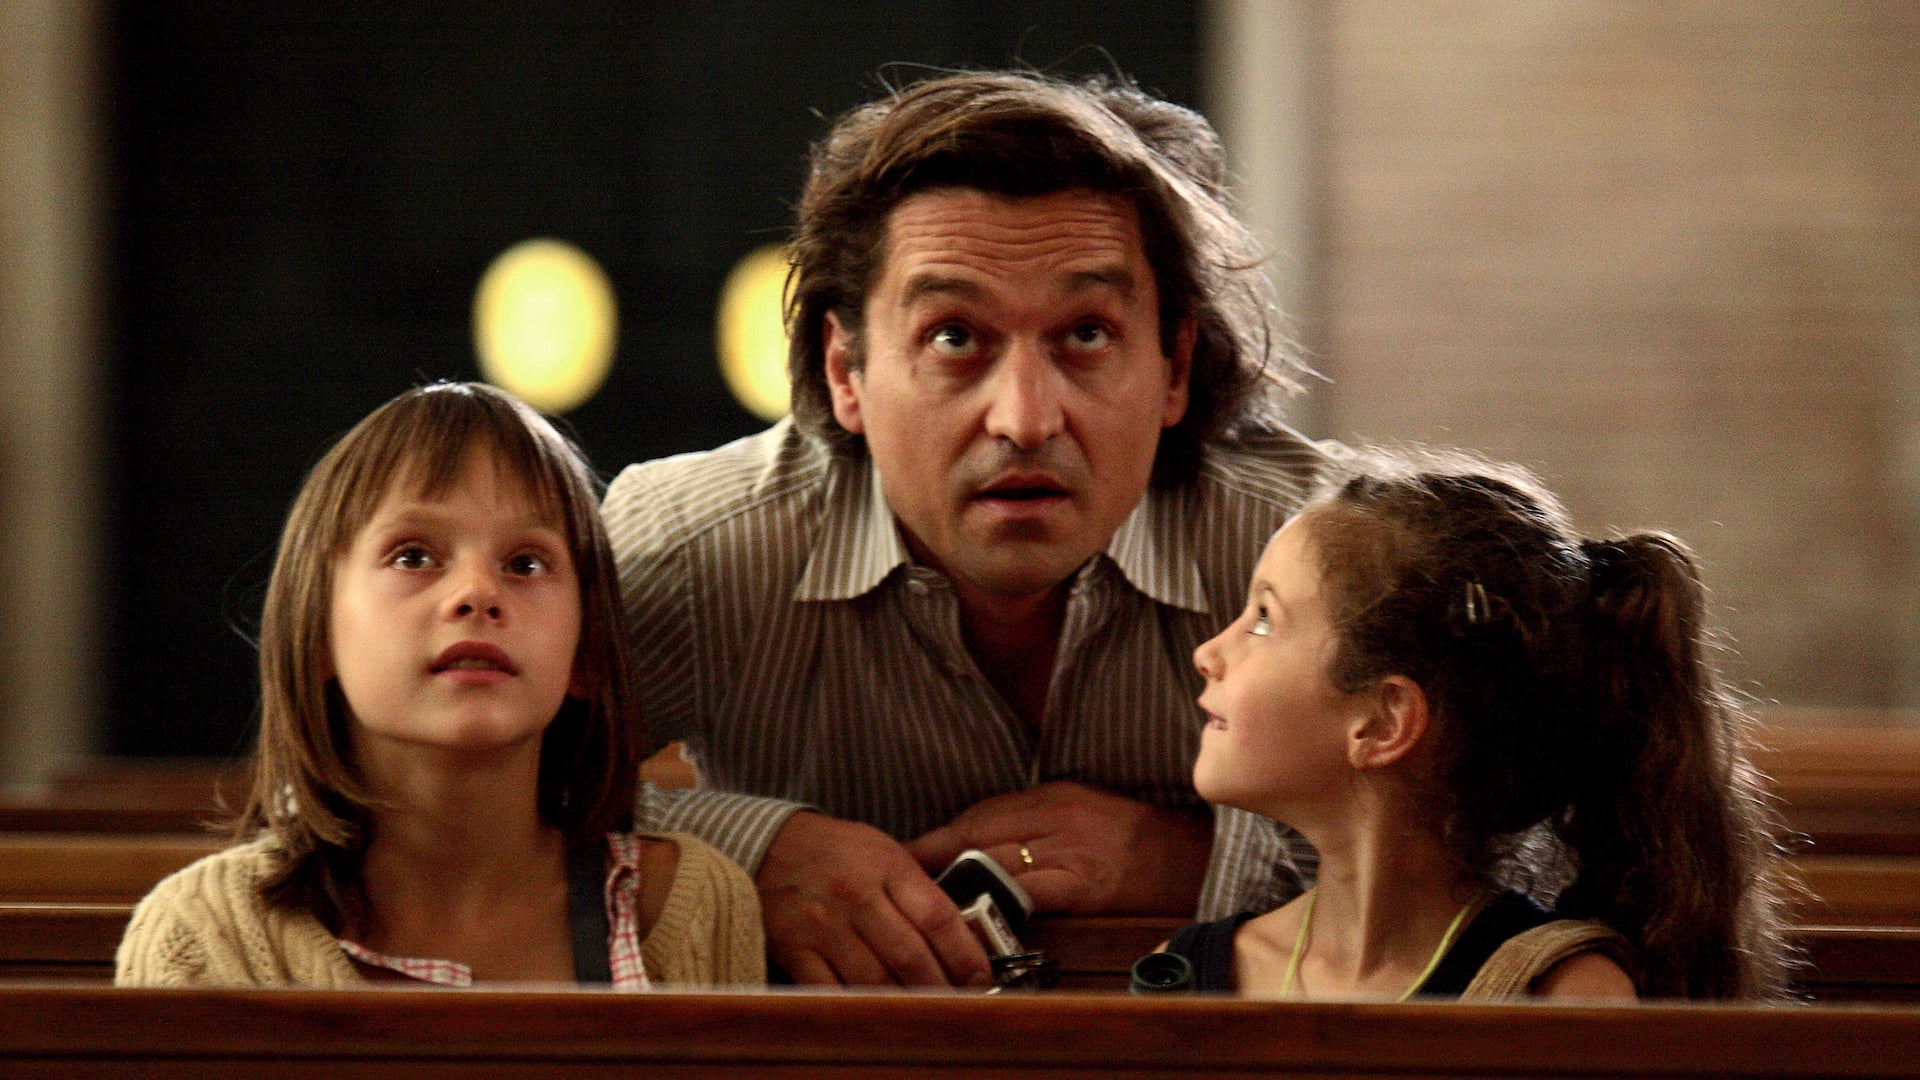 Father of My Children (2009)